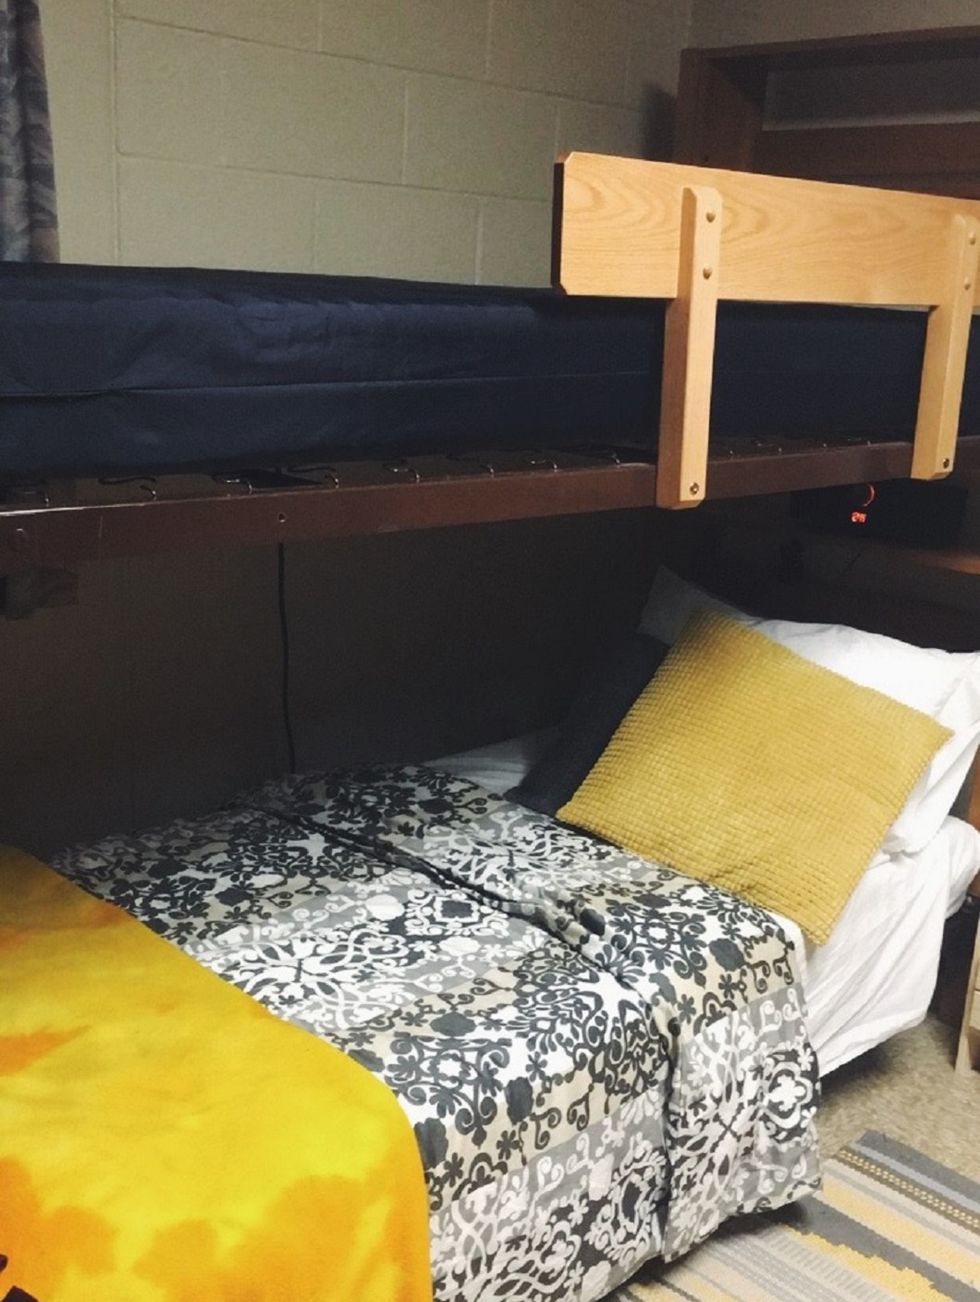 To The College Roommate Who Was Just A Roommate